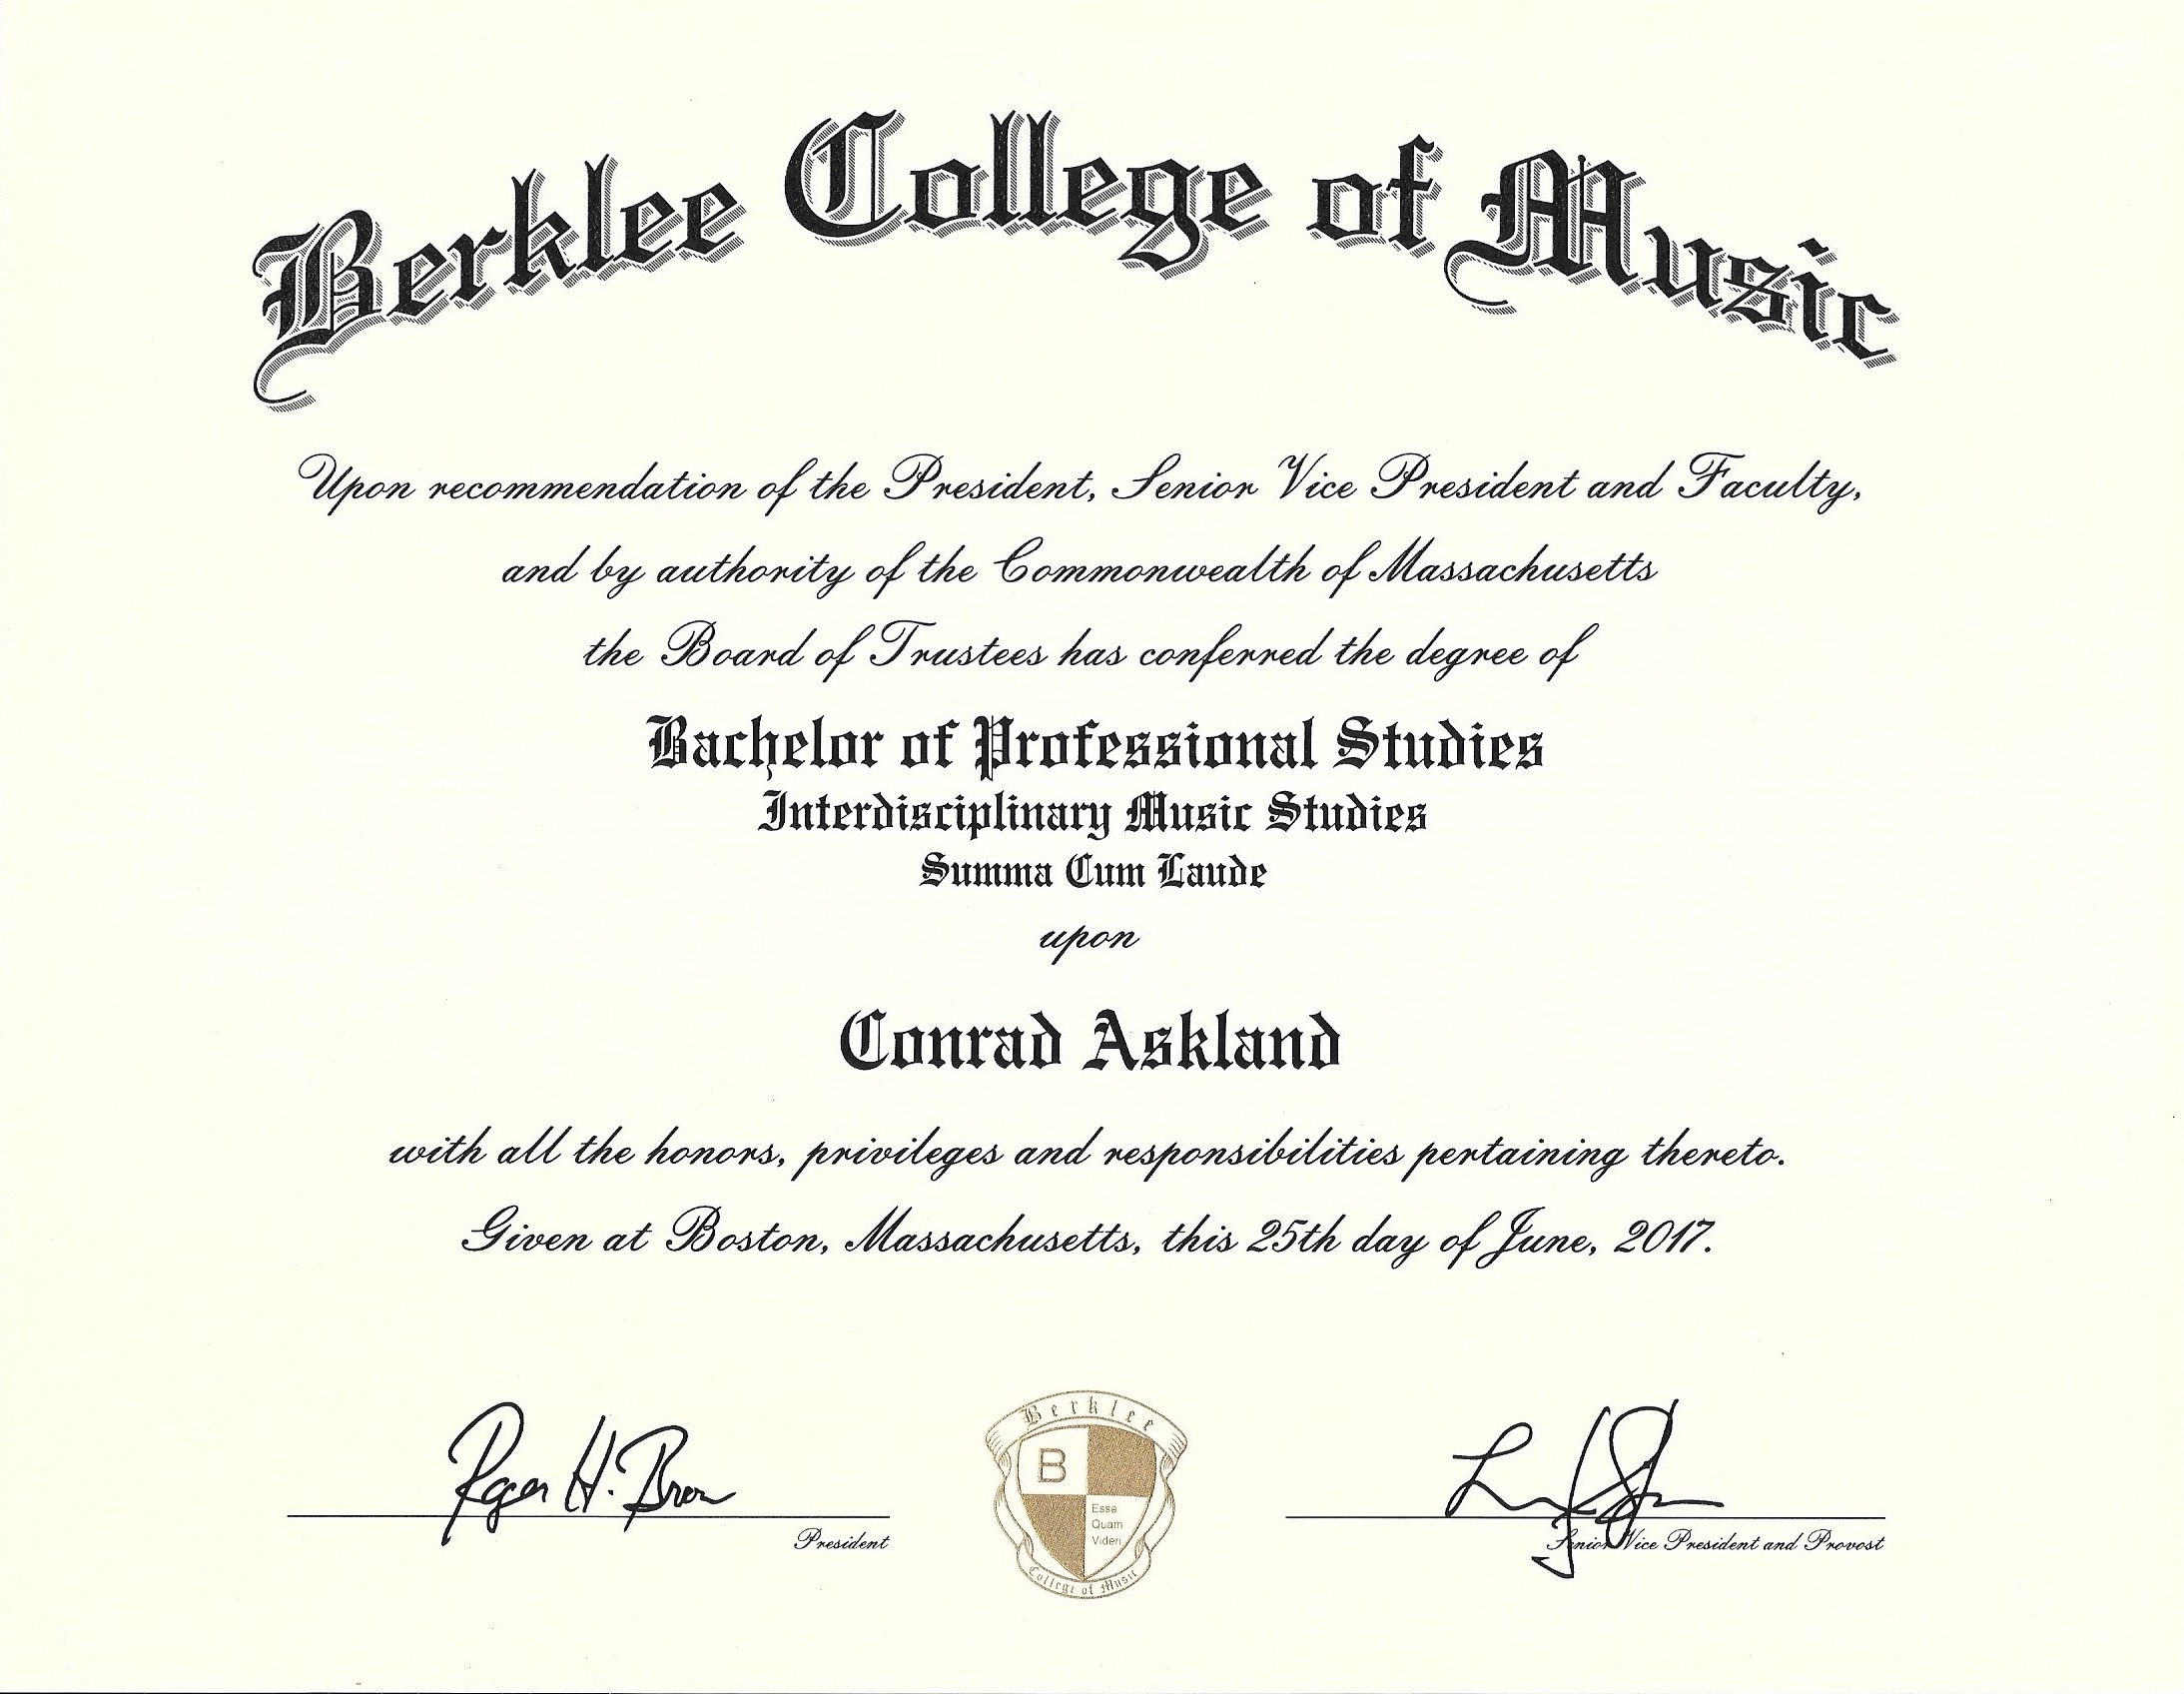 music production degree